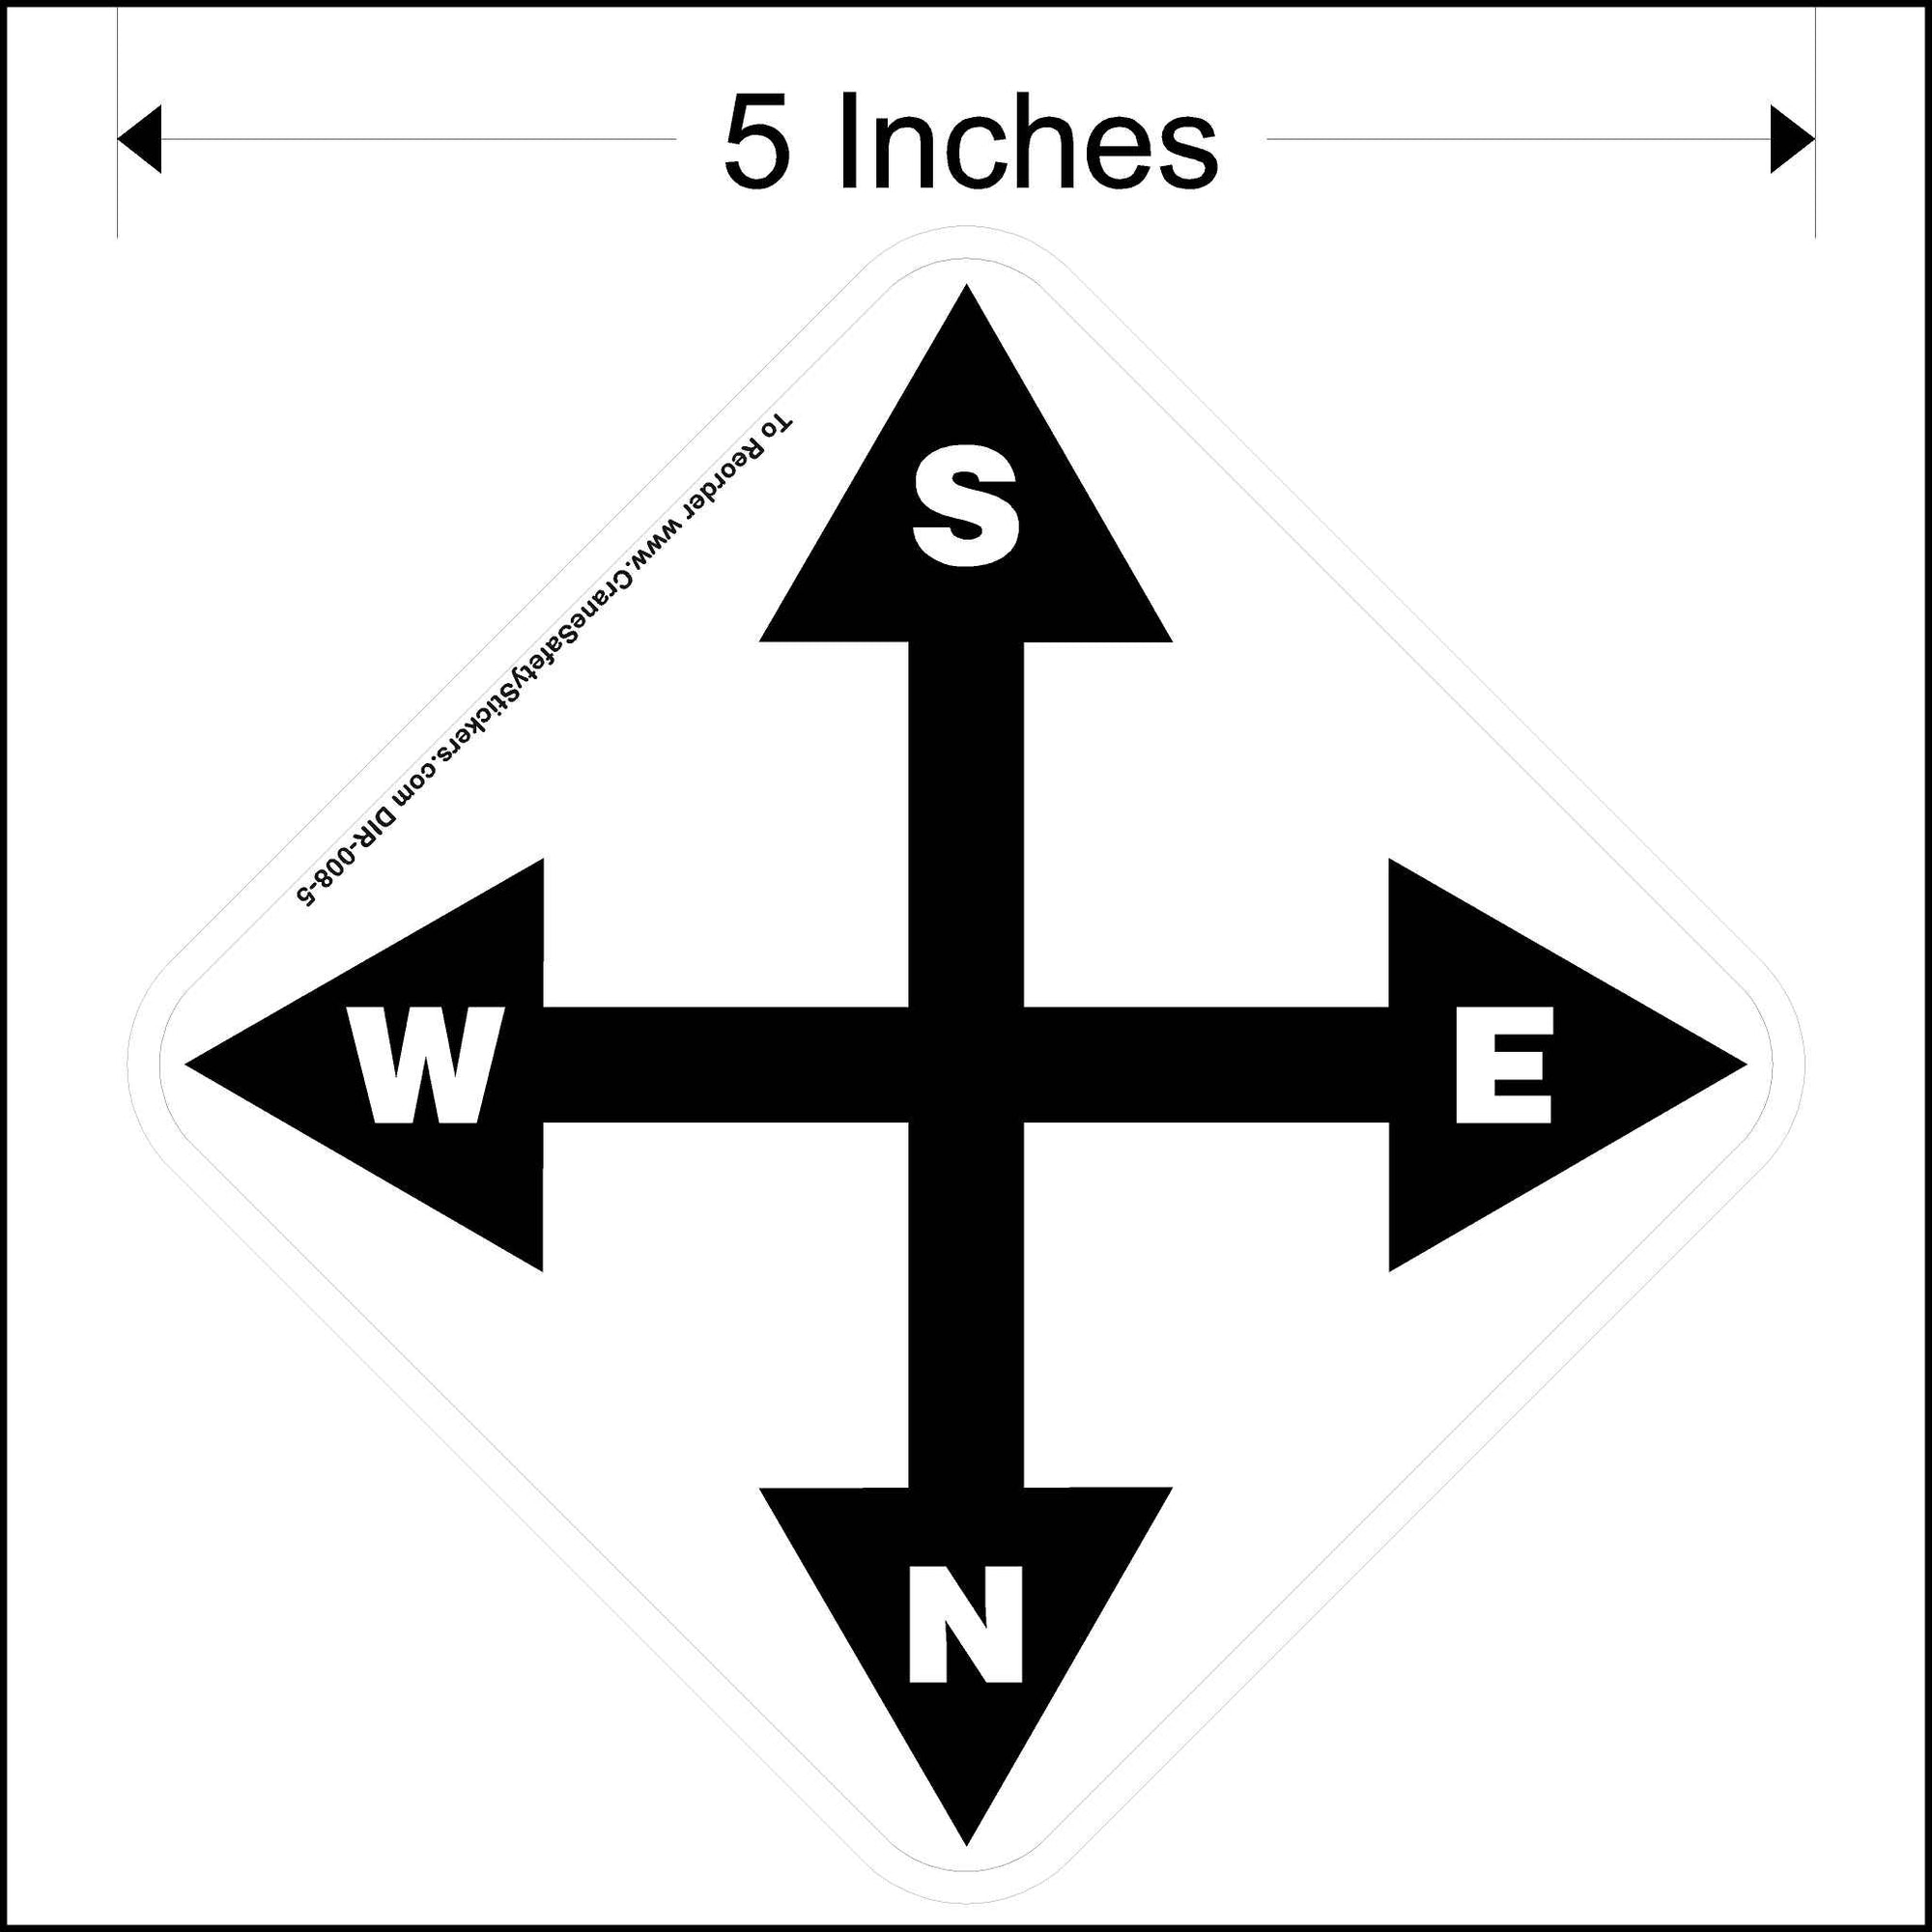 5 Inch South, east, north, and west overhead crane directional decal. Printed in black and white.